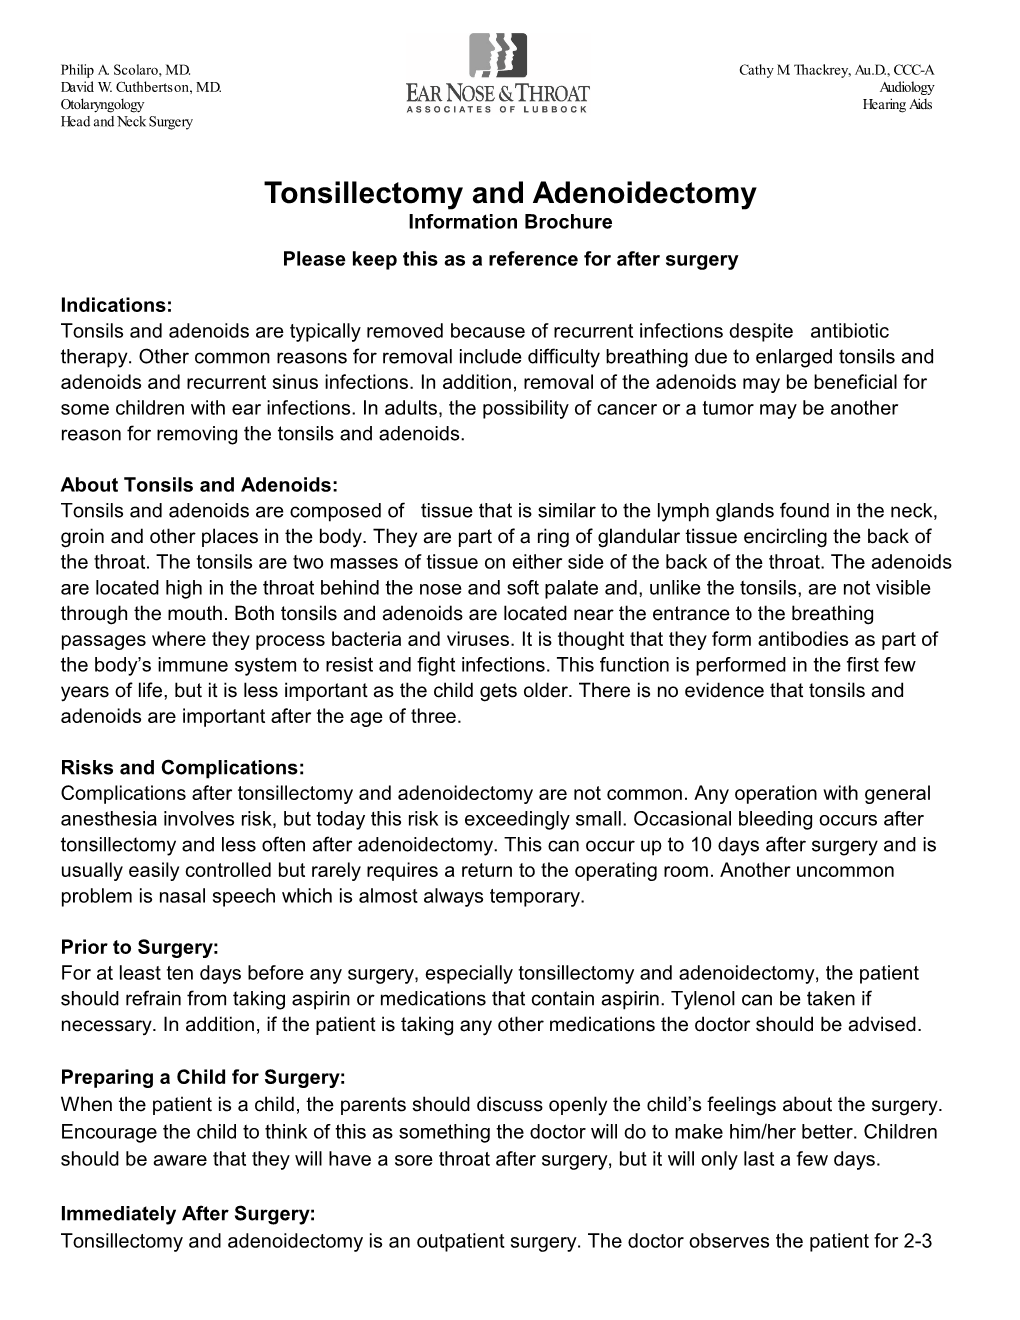 Tonsillectomy and Adenoidectomy Information Brochure Please Keep This As a Reference for After Surgery